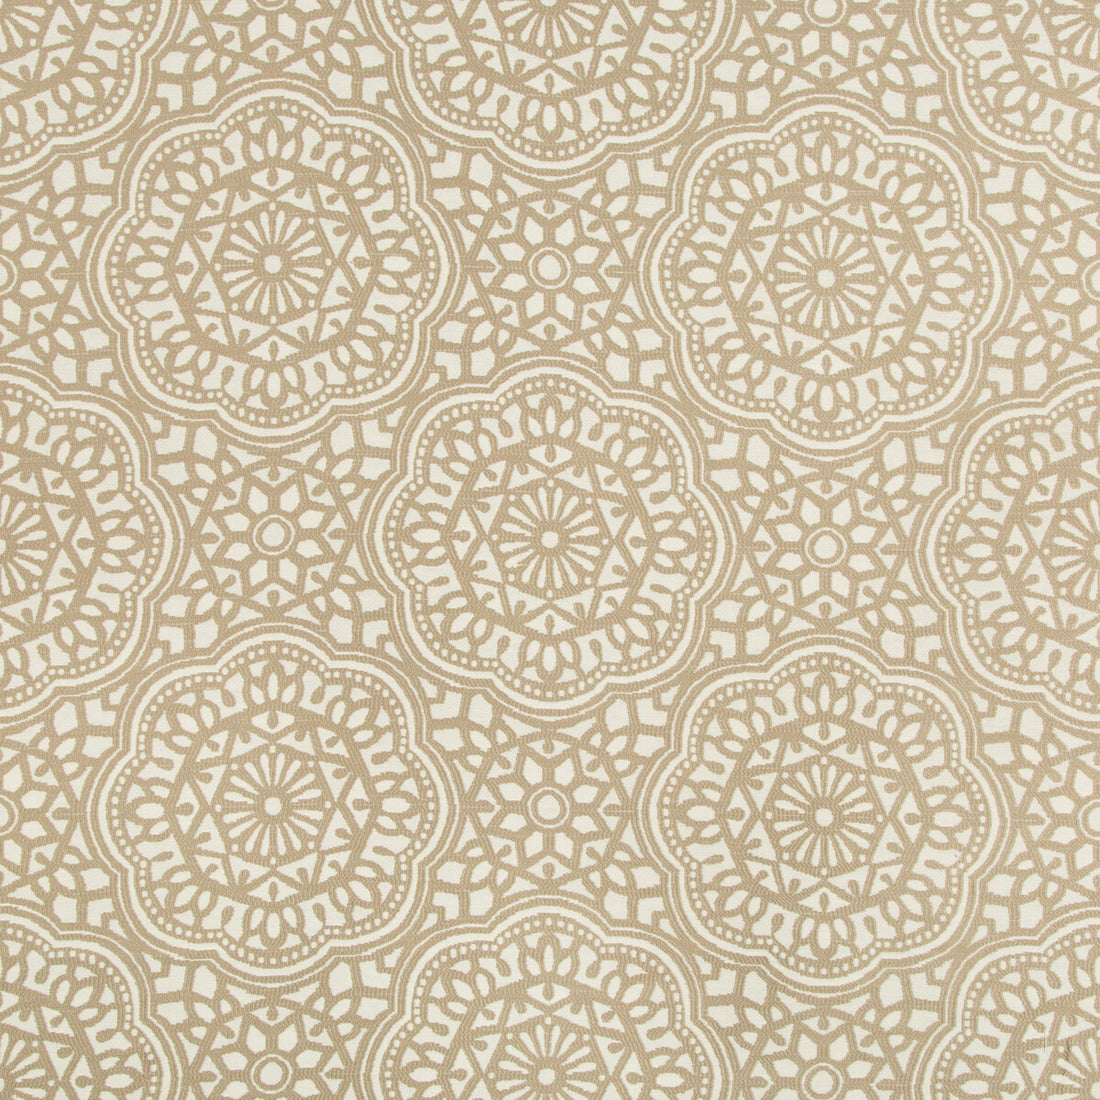 Kravet Design fabric in 35171-106 color - pattern 35171.106.0 - by Kravet Design in the Performance Crypton Home collection